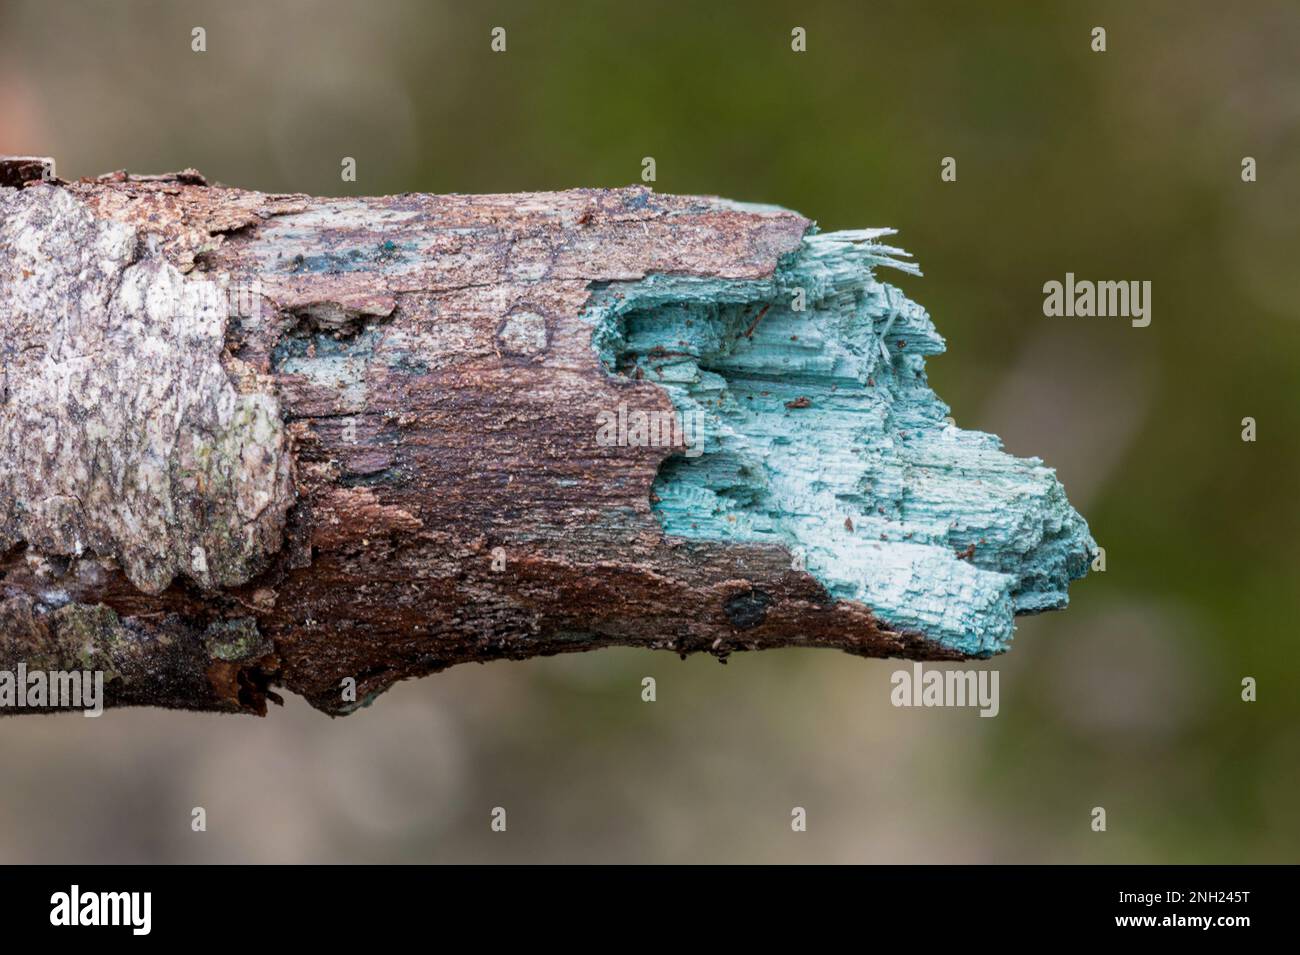 Green staining of rotting wood or stick associated with green elf cup fungi (Chlorociboria aeruginascens), England, UK Stock Photo